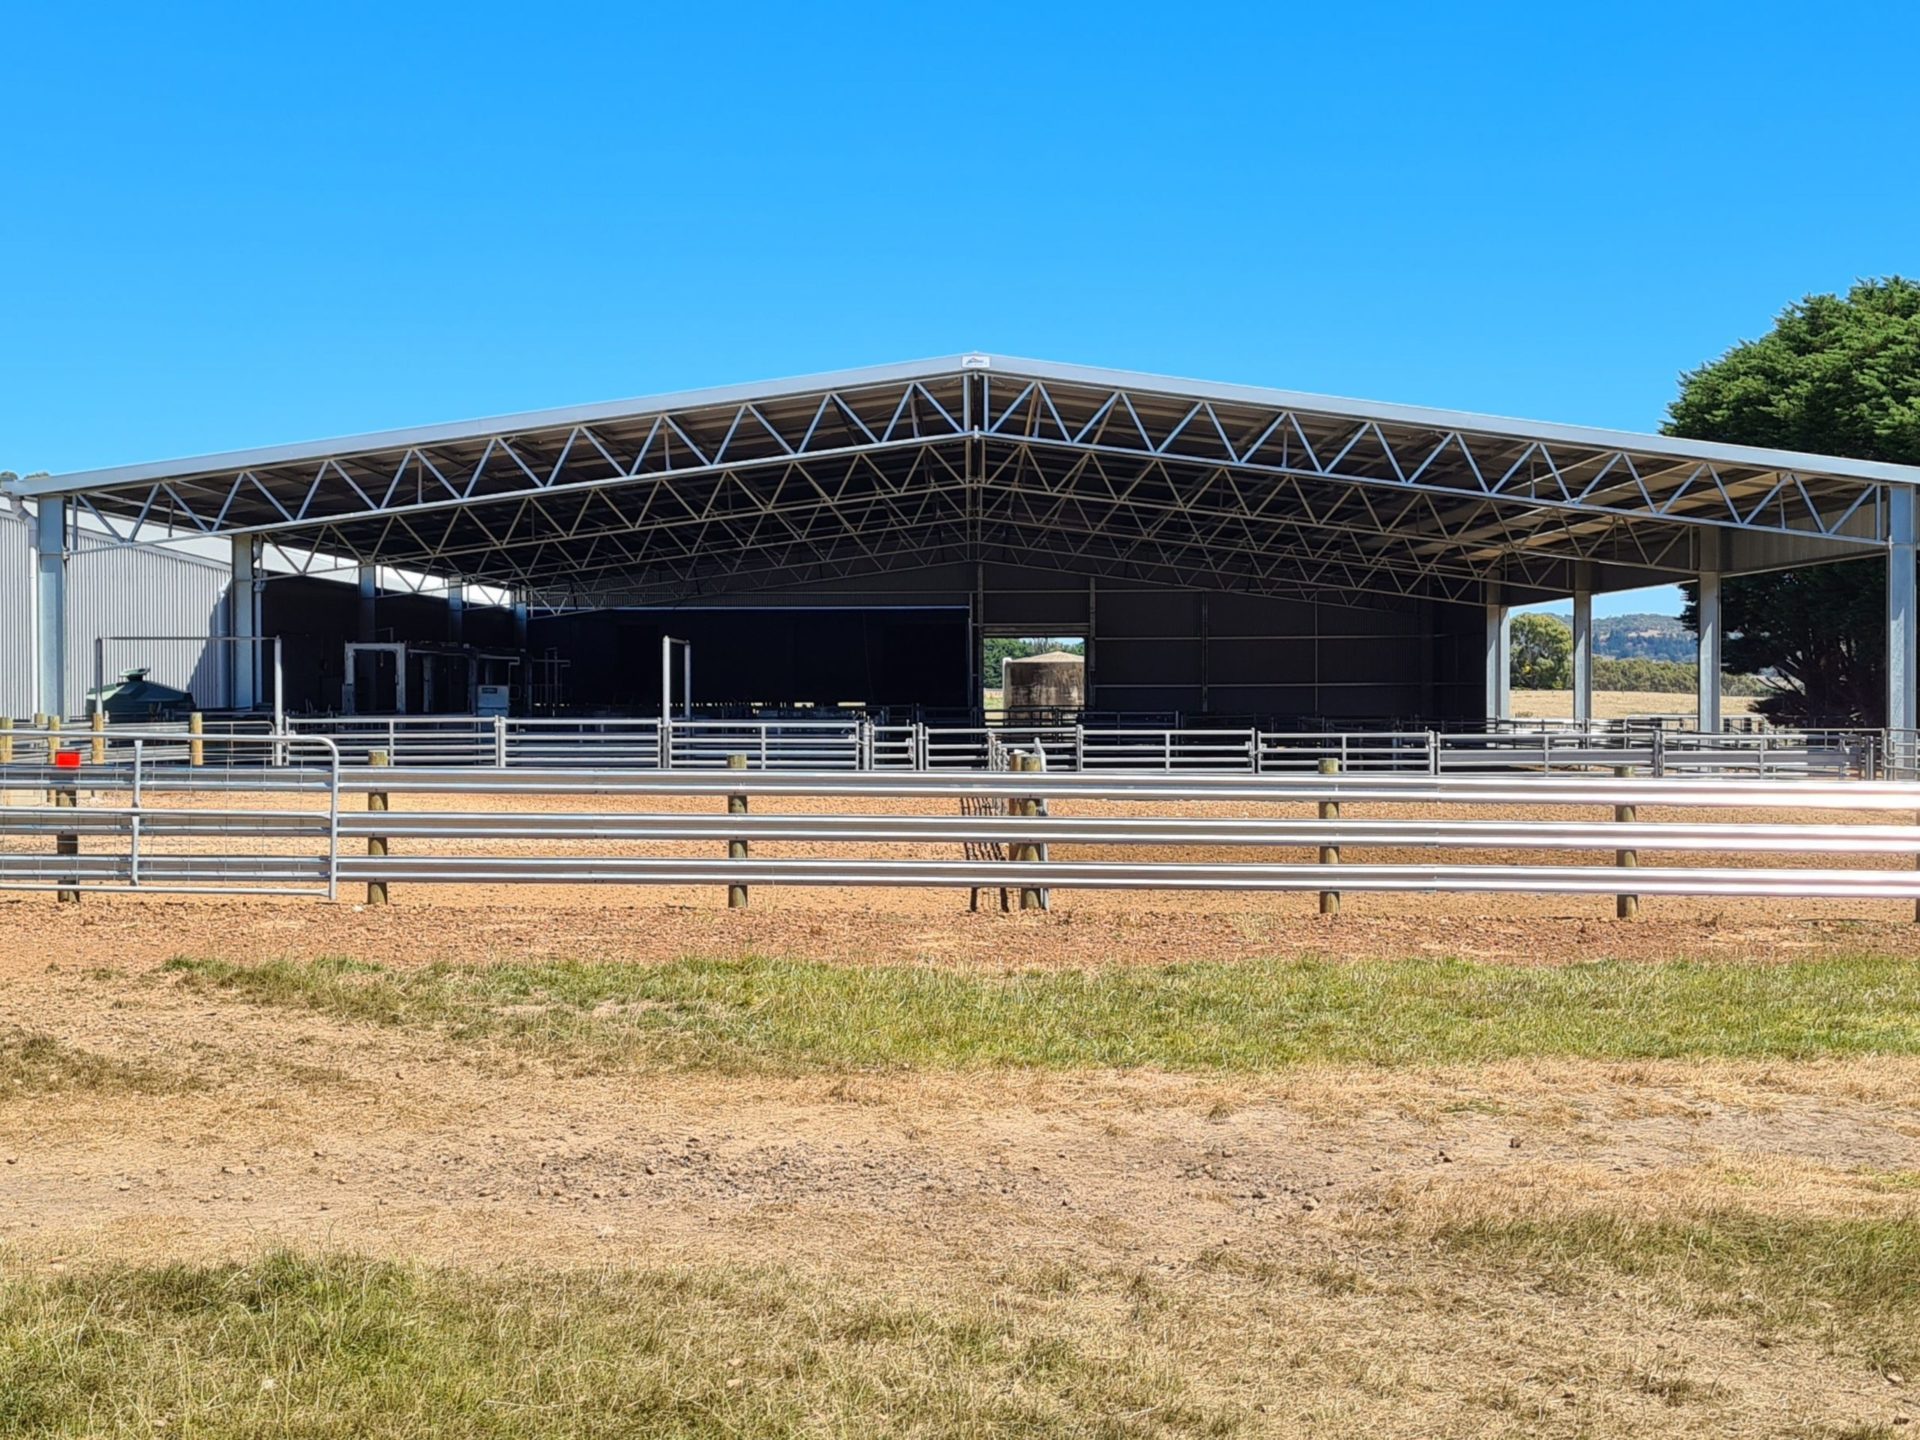 You are currently viewing A 36m x 21m x 4.2m sheep yard cover